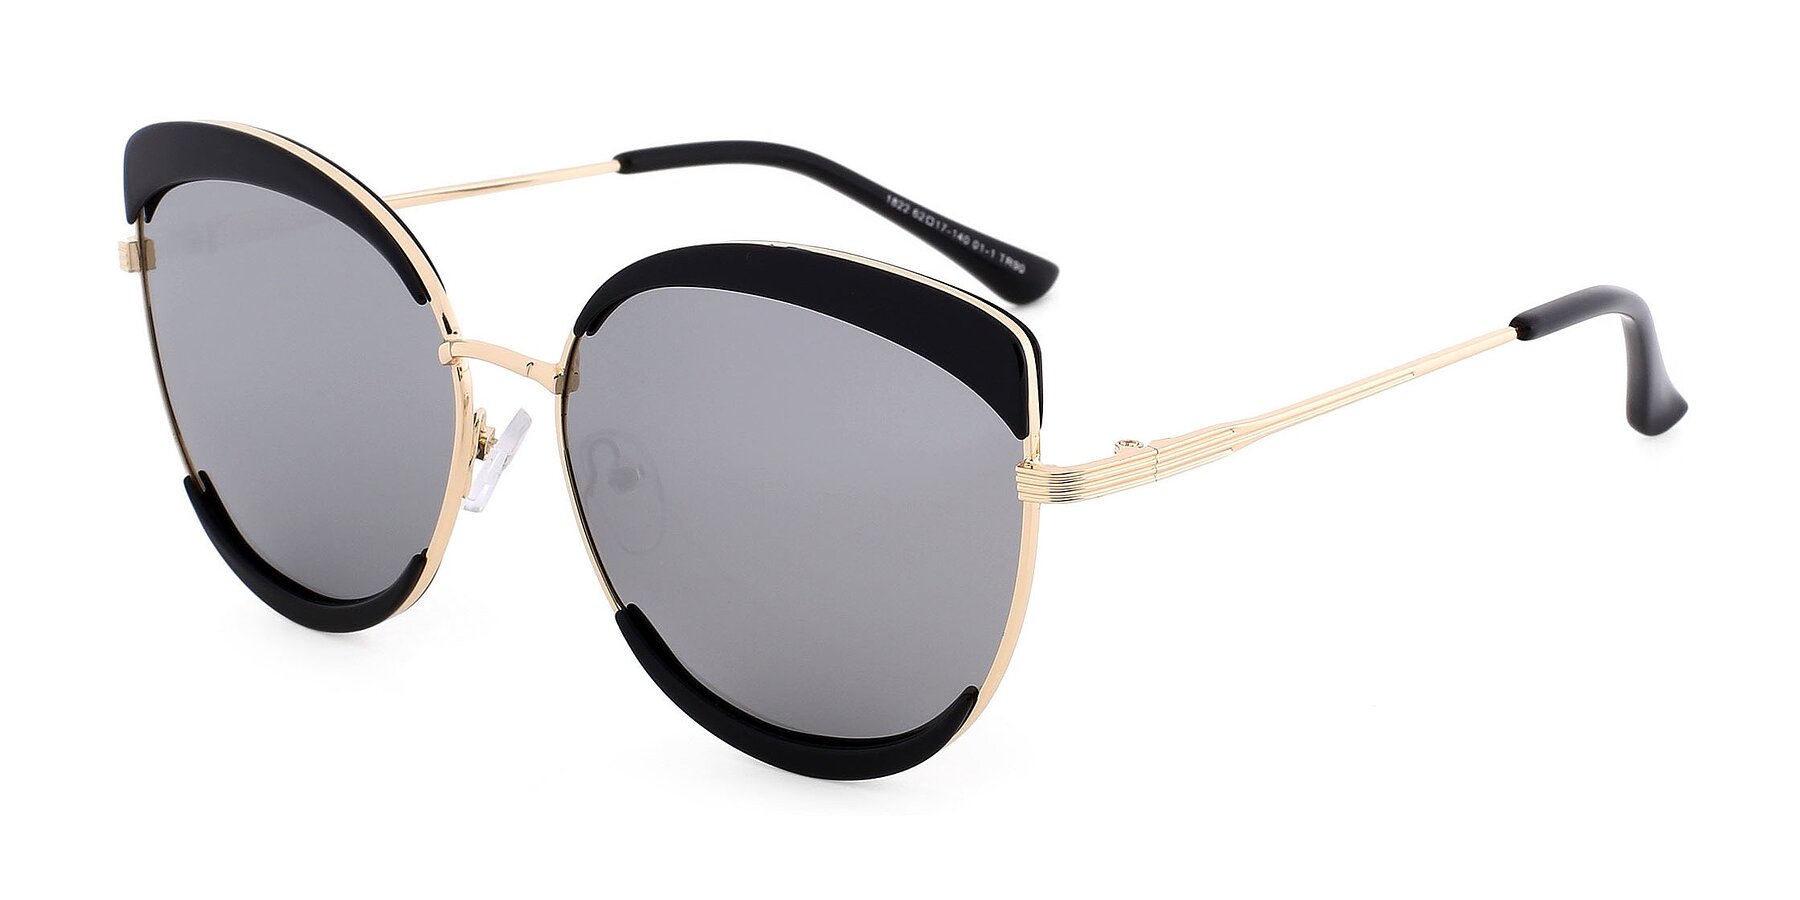 Black-Gold Wide Oversized Cat-Eye Mirrored Polarized Sunglasses with Silver Non-Rx Tac Sun Lenses